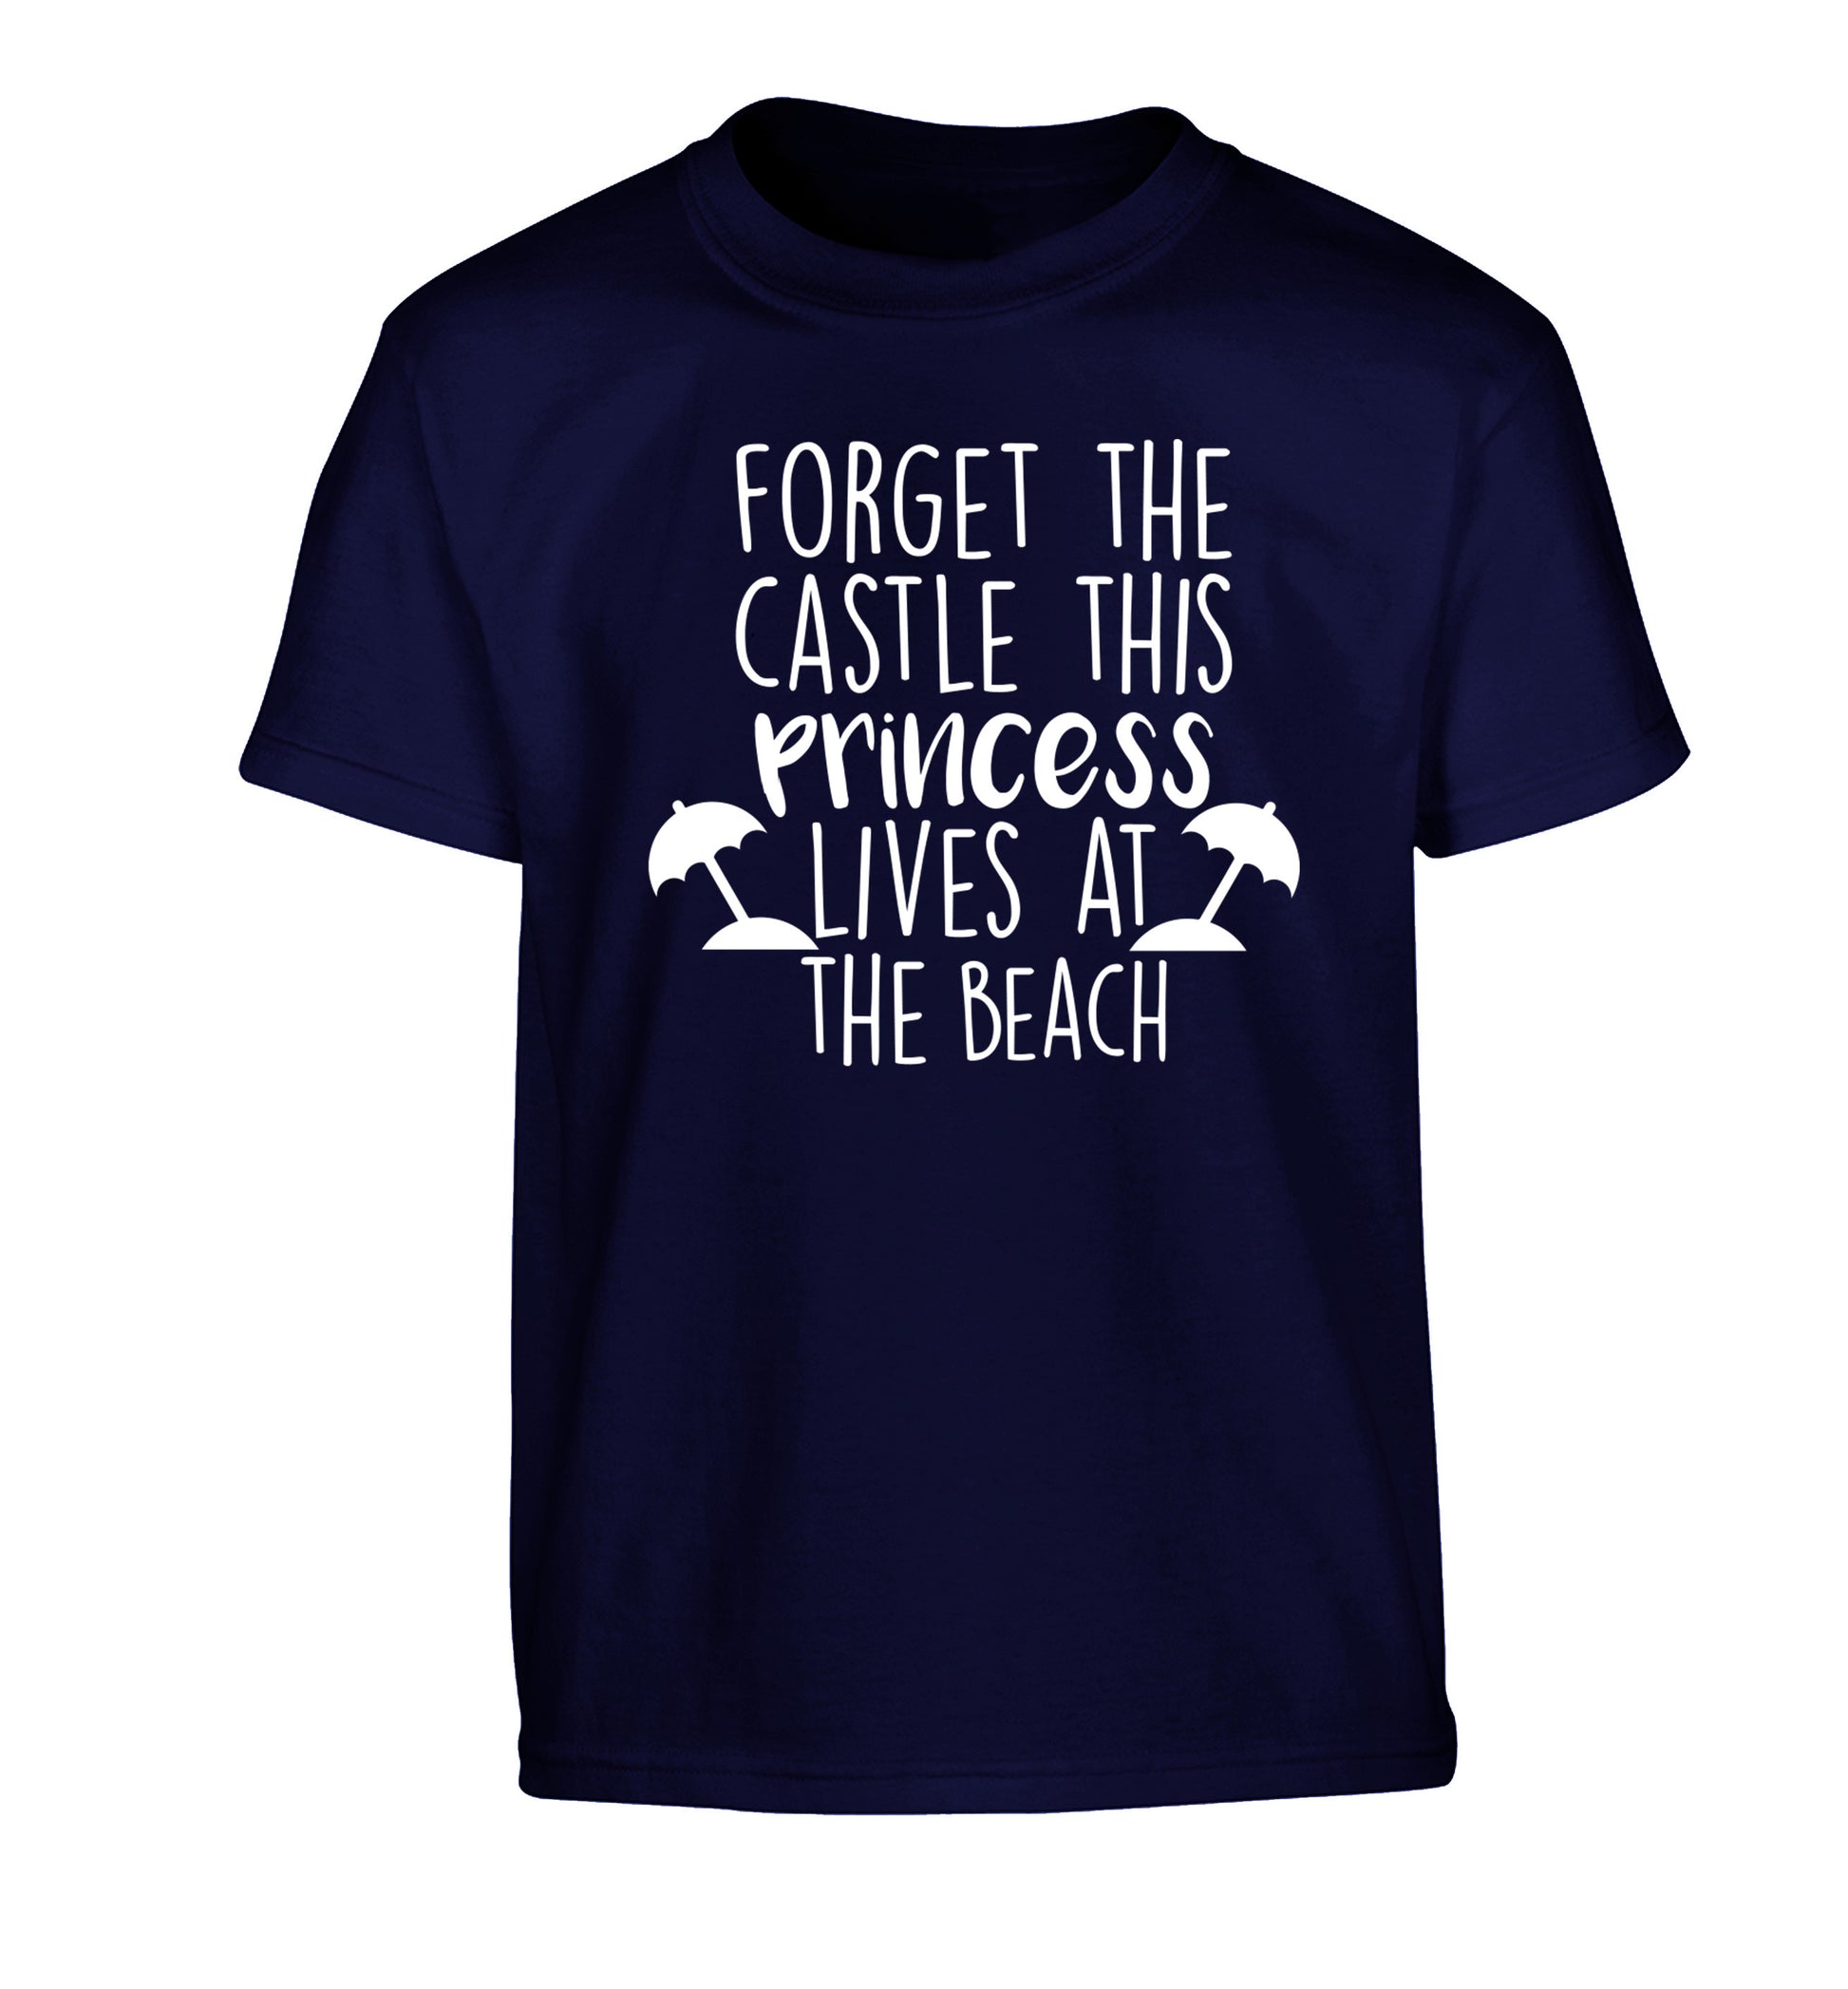 Forget the castle this princess lives at the beach Children's navy Tshirt 12-14 Years